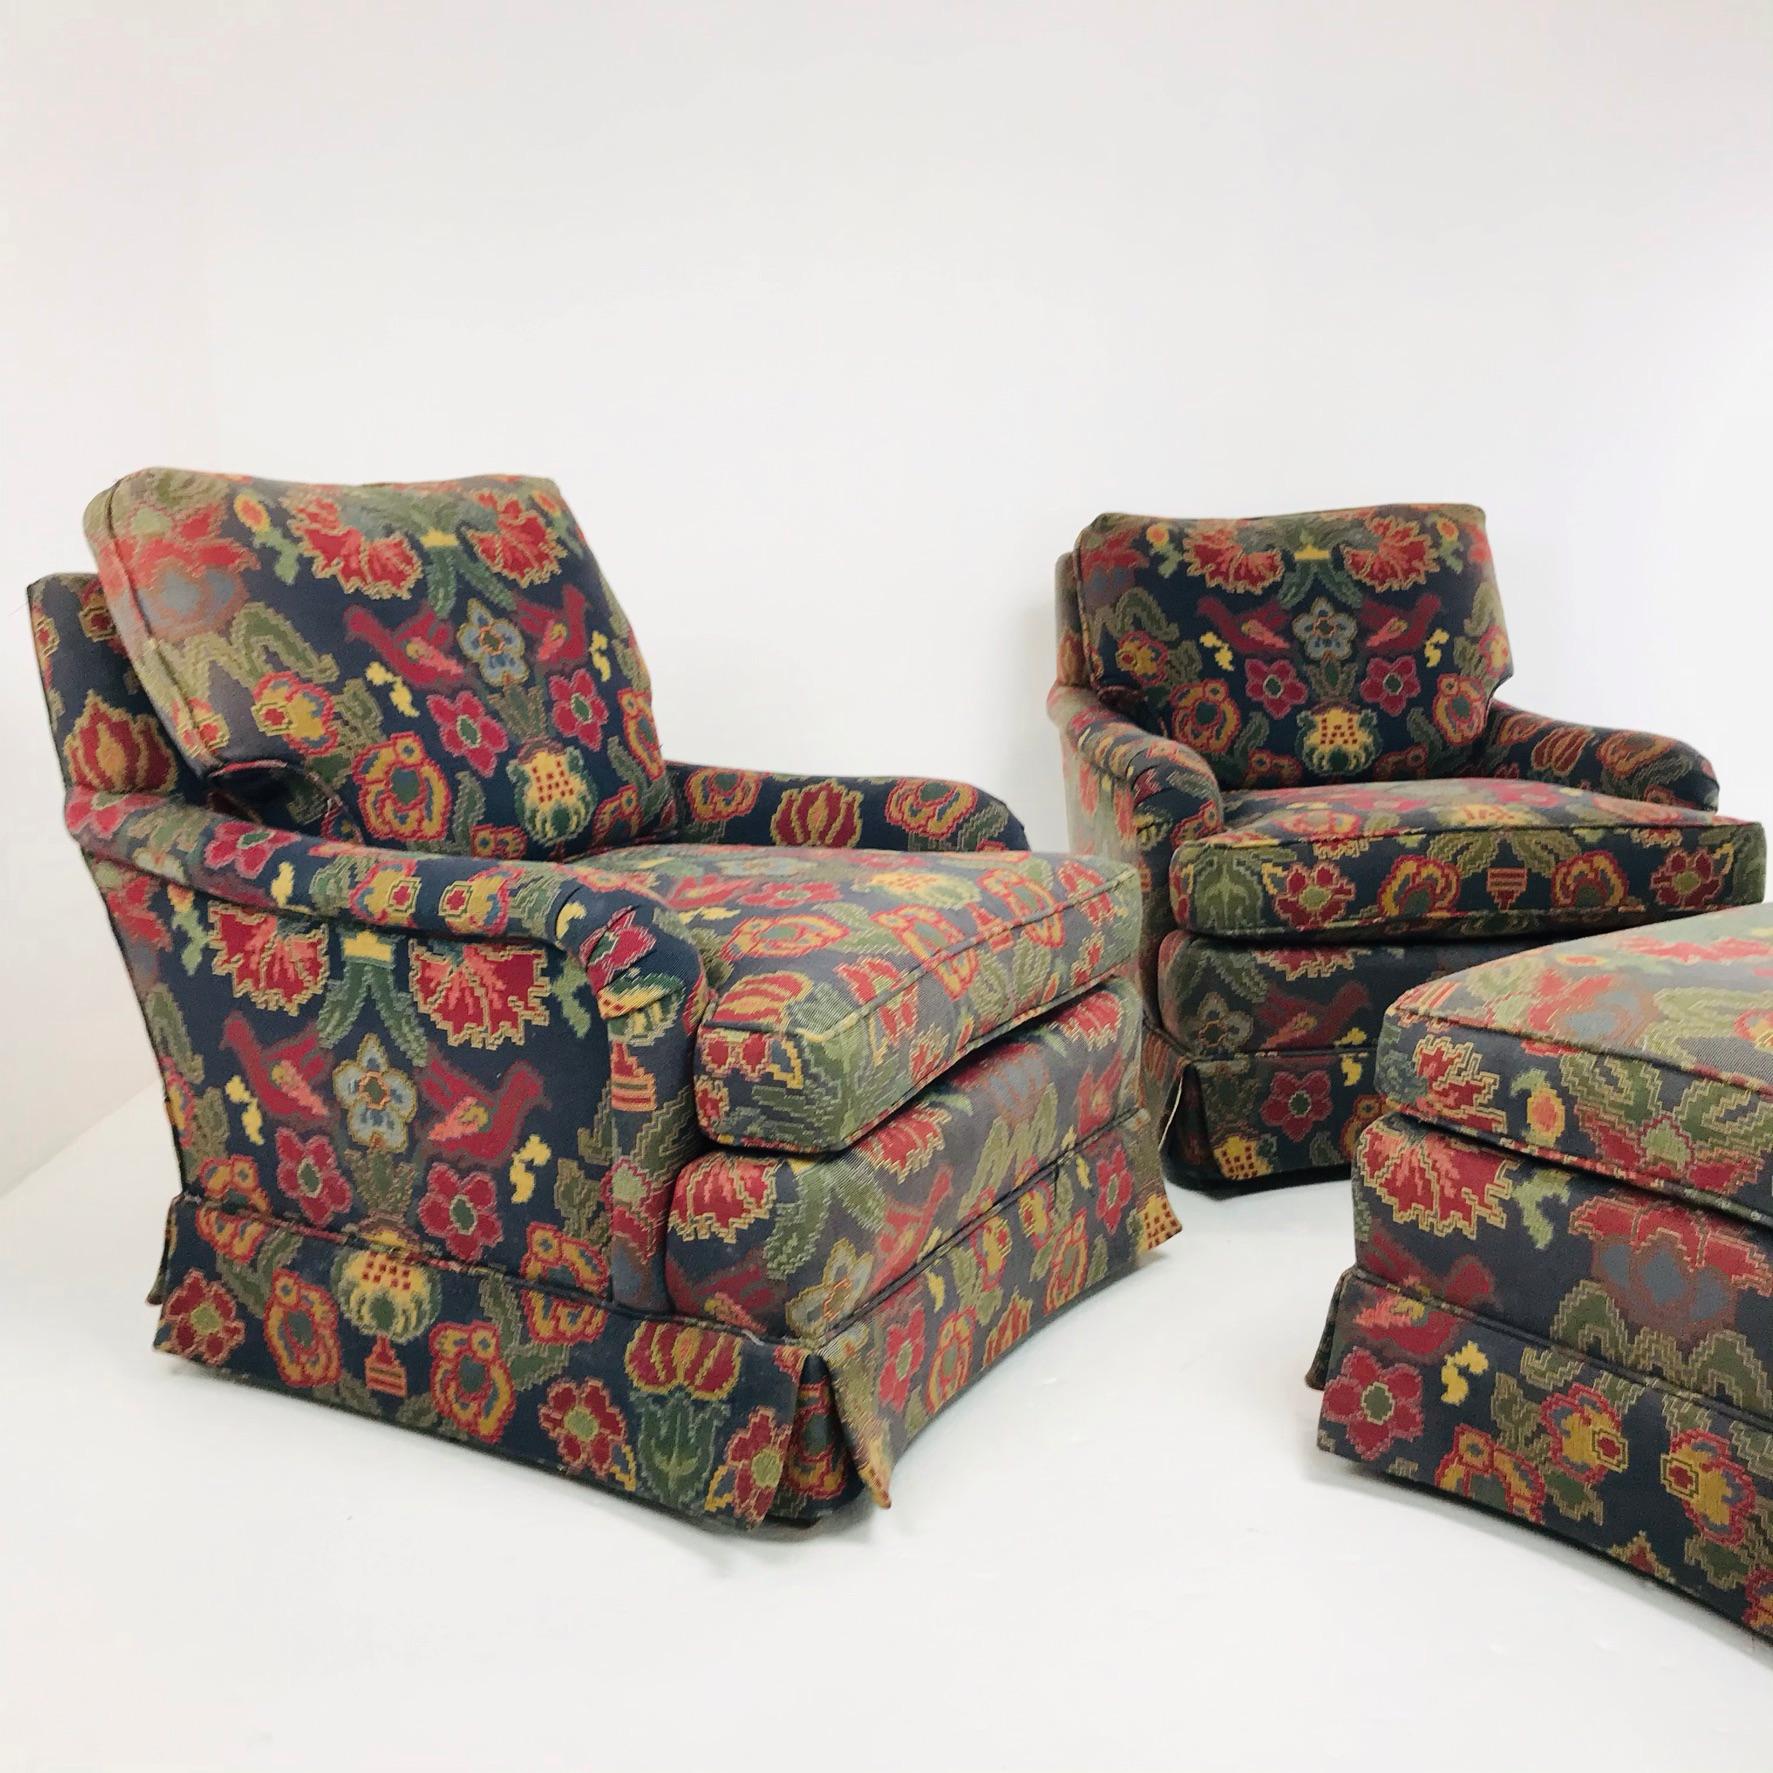 Vintage pair of English style lounge chairs with one ottoman by Baker Furniture Company. Extremely sturdy frames. Fabric is sun faded on one chair and we recommend re-upholstery. Chairs measure: 32